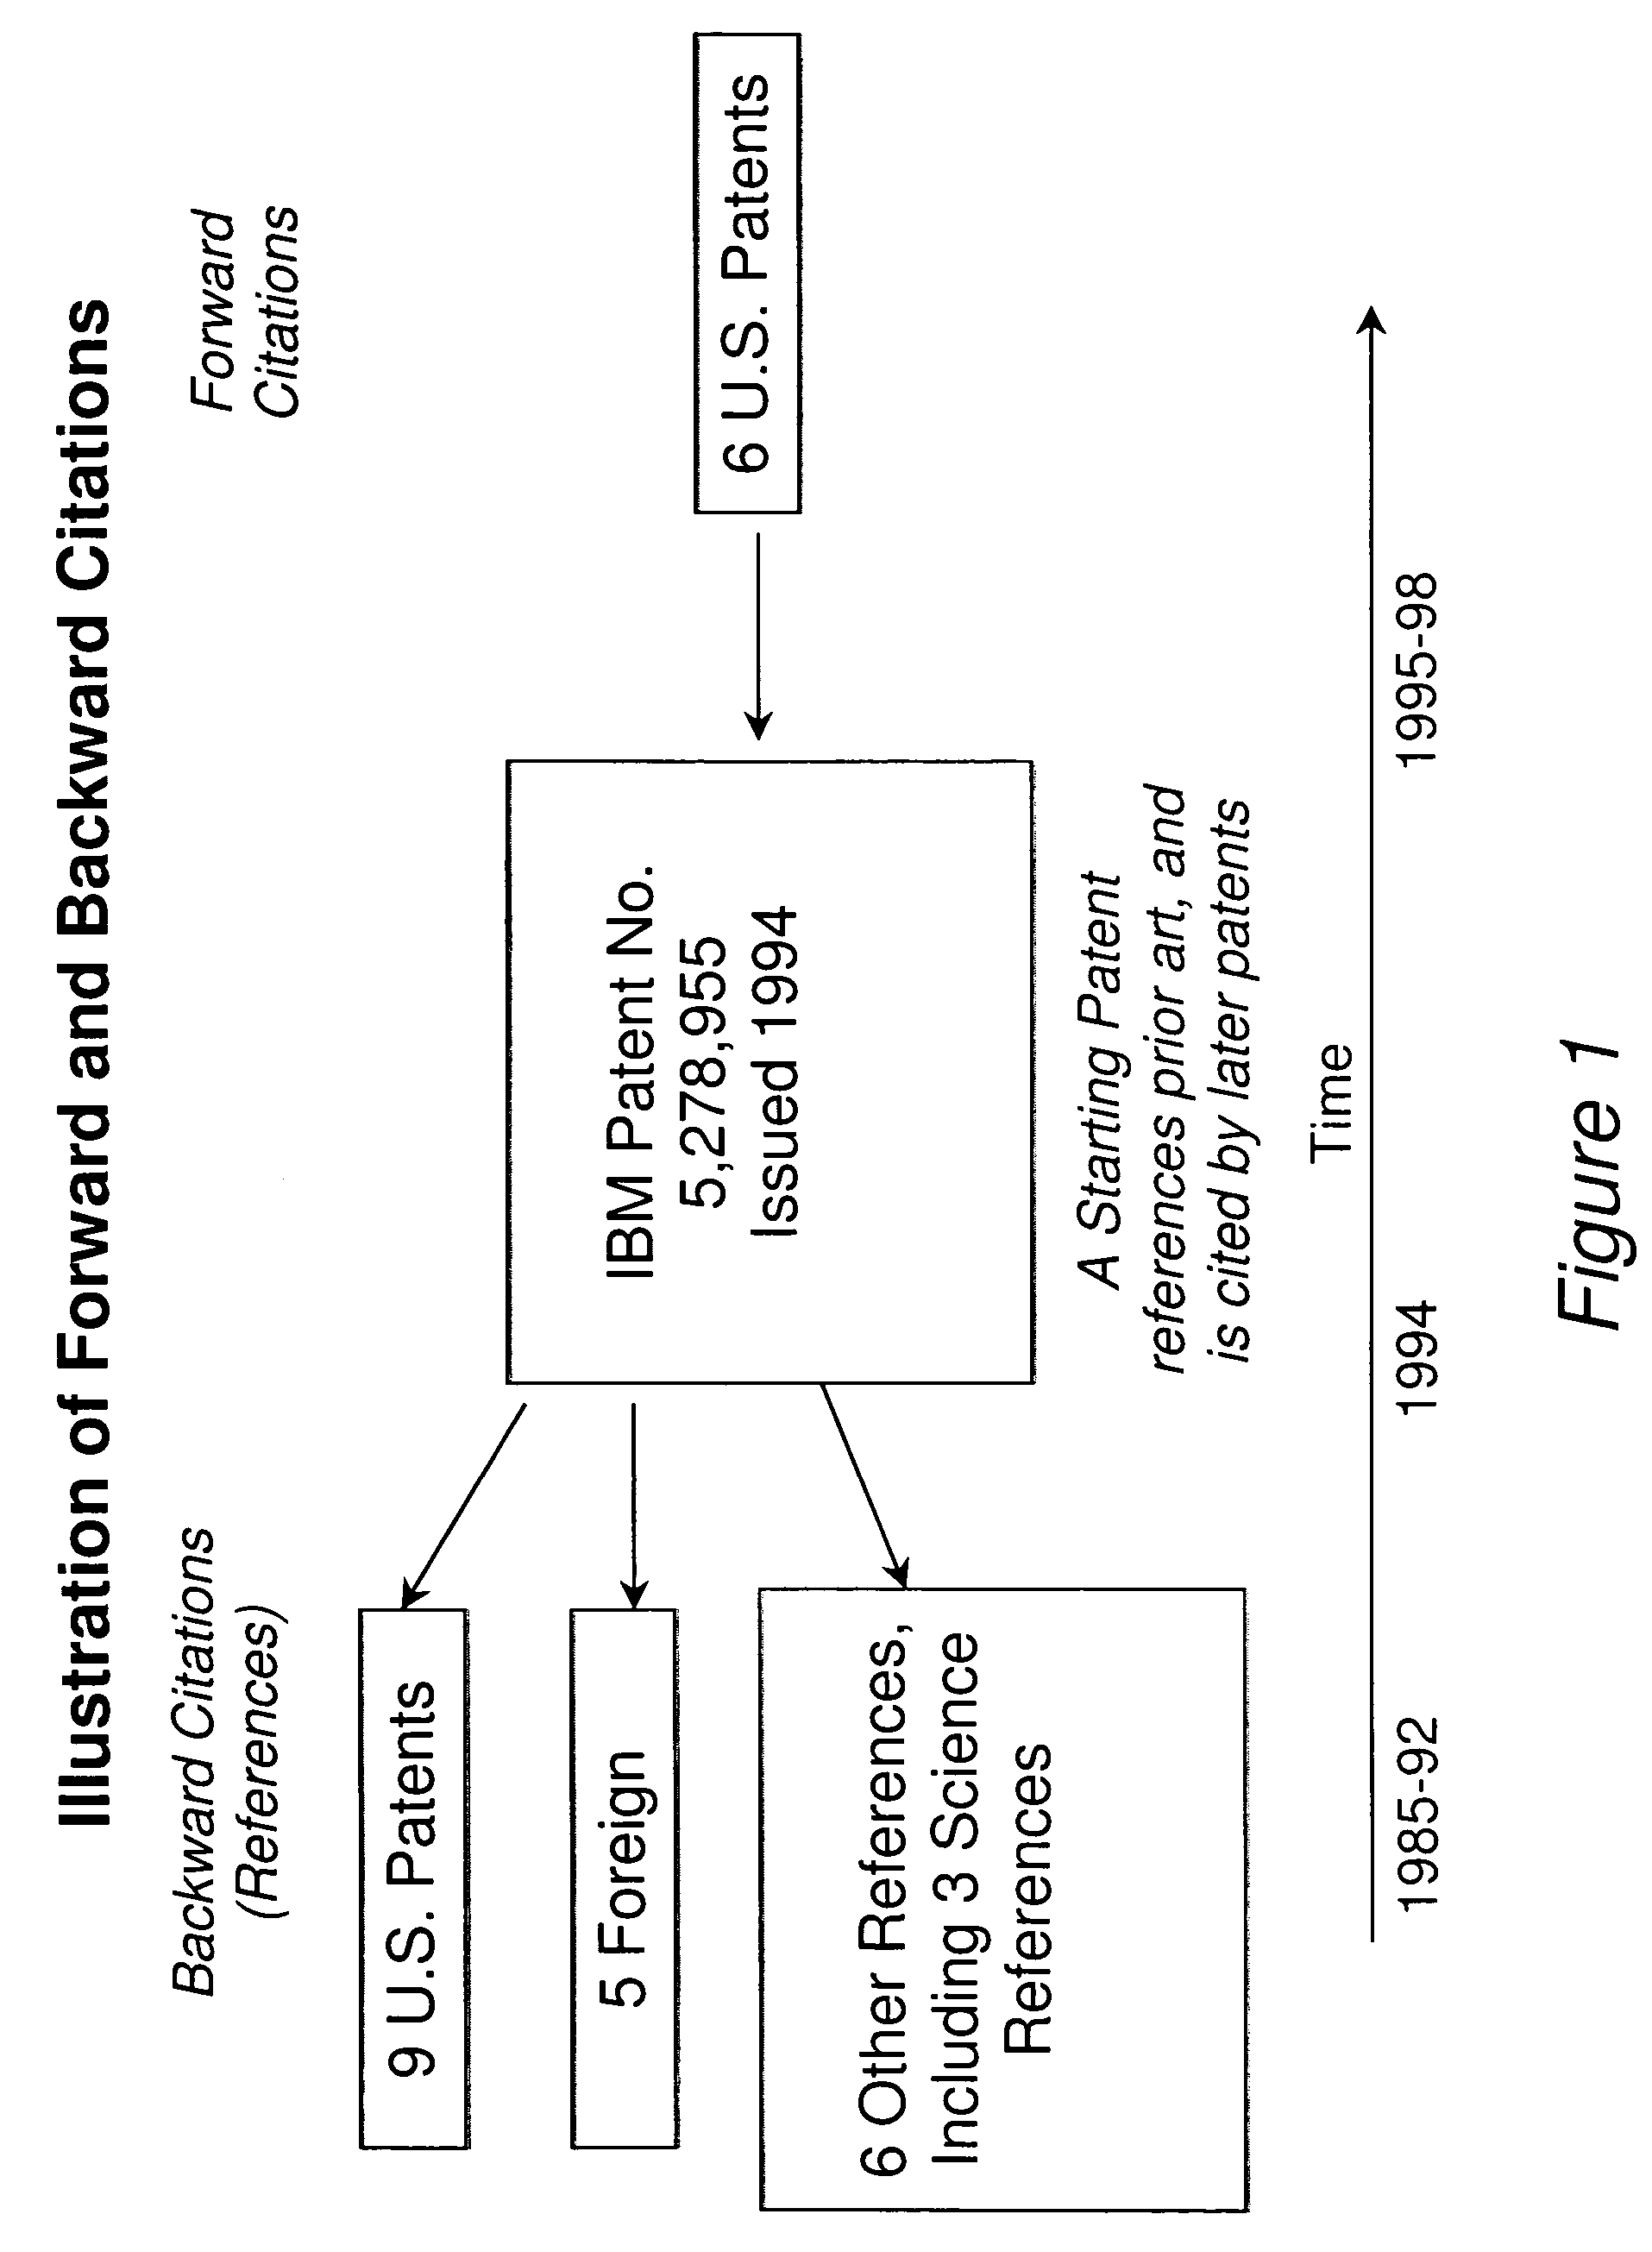 Identification of licensing targets using citation neighbor search process